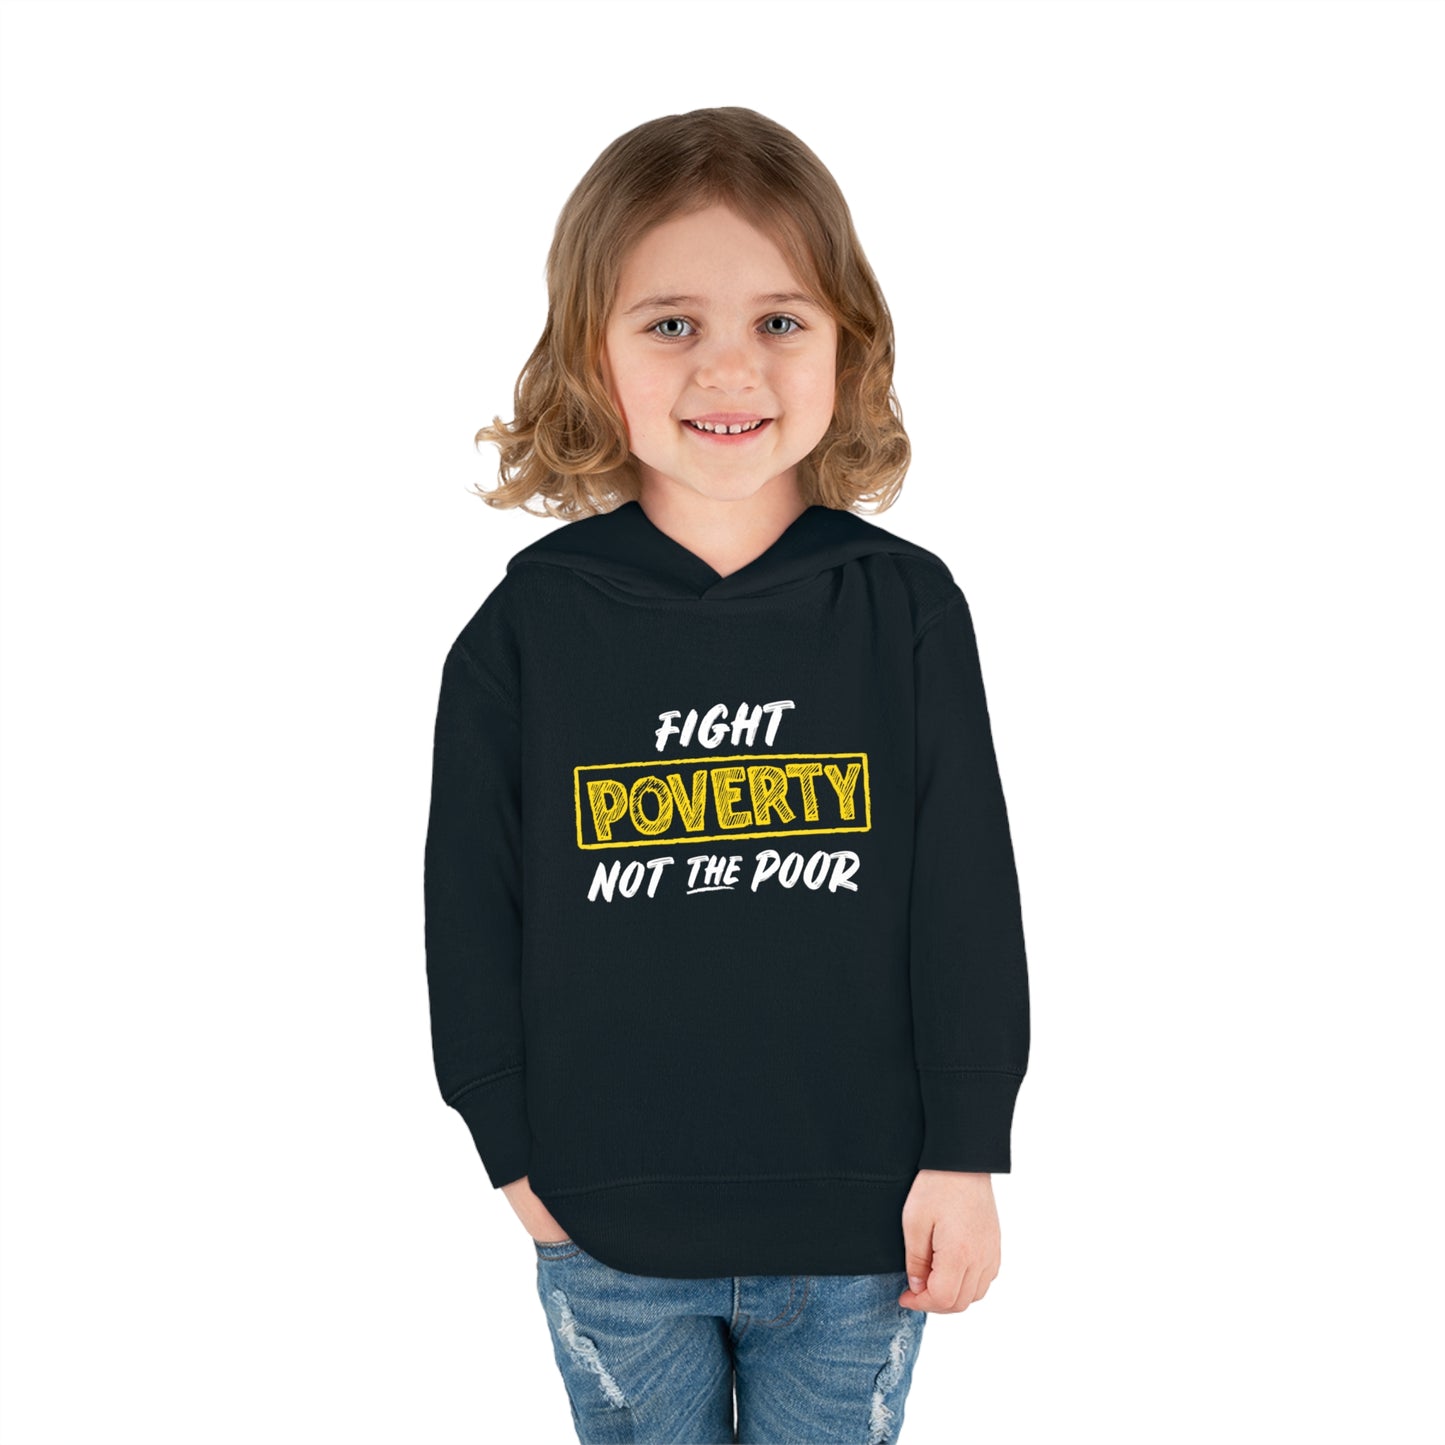 “Fight Poverty Not The Poor” Toddler Hoodie